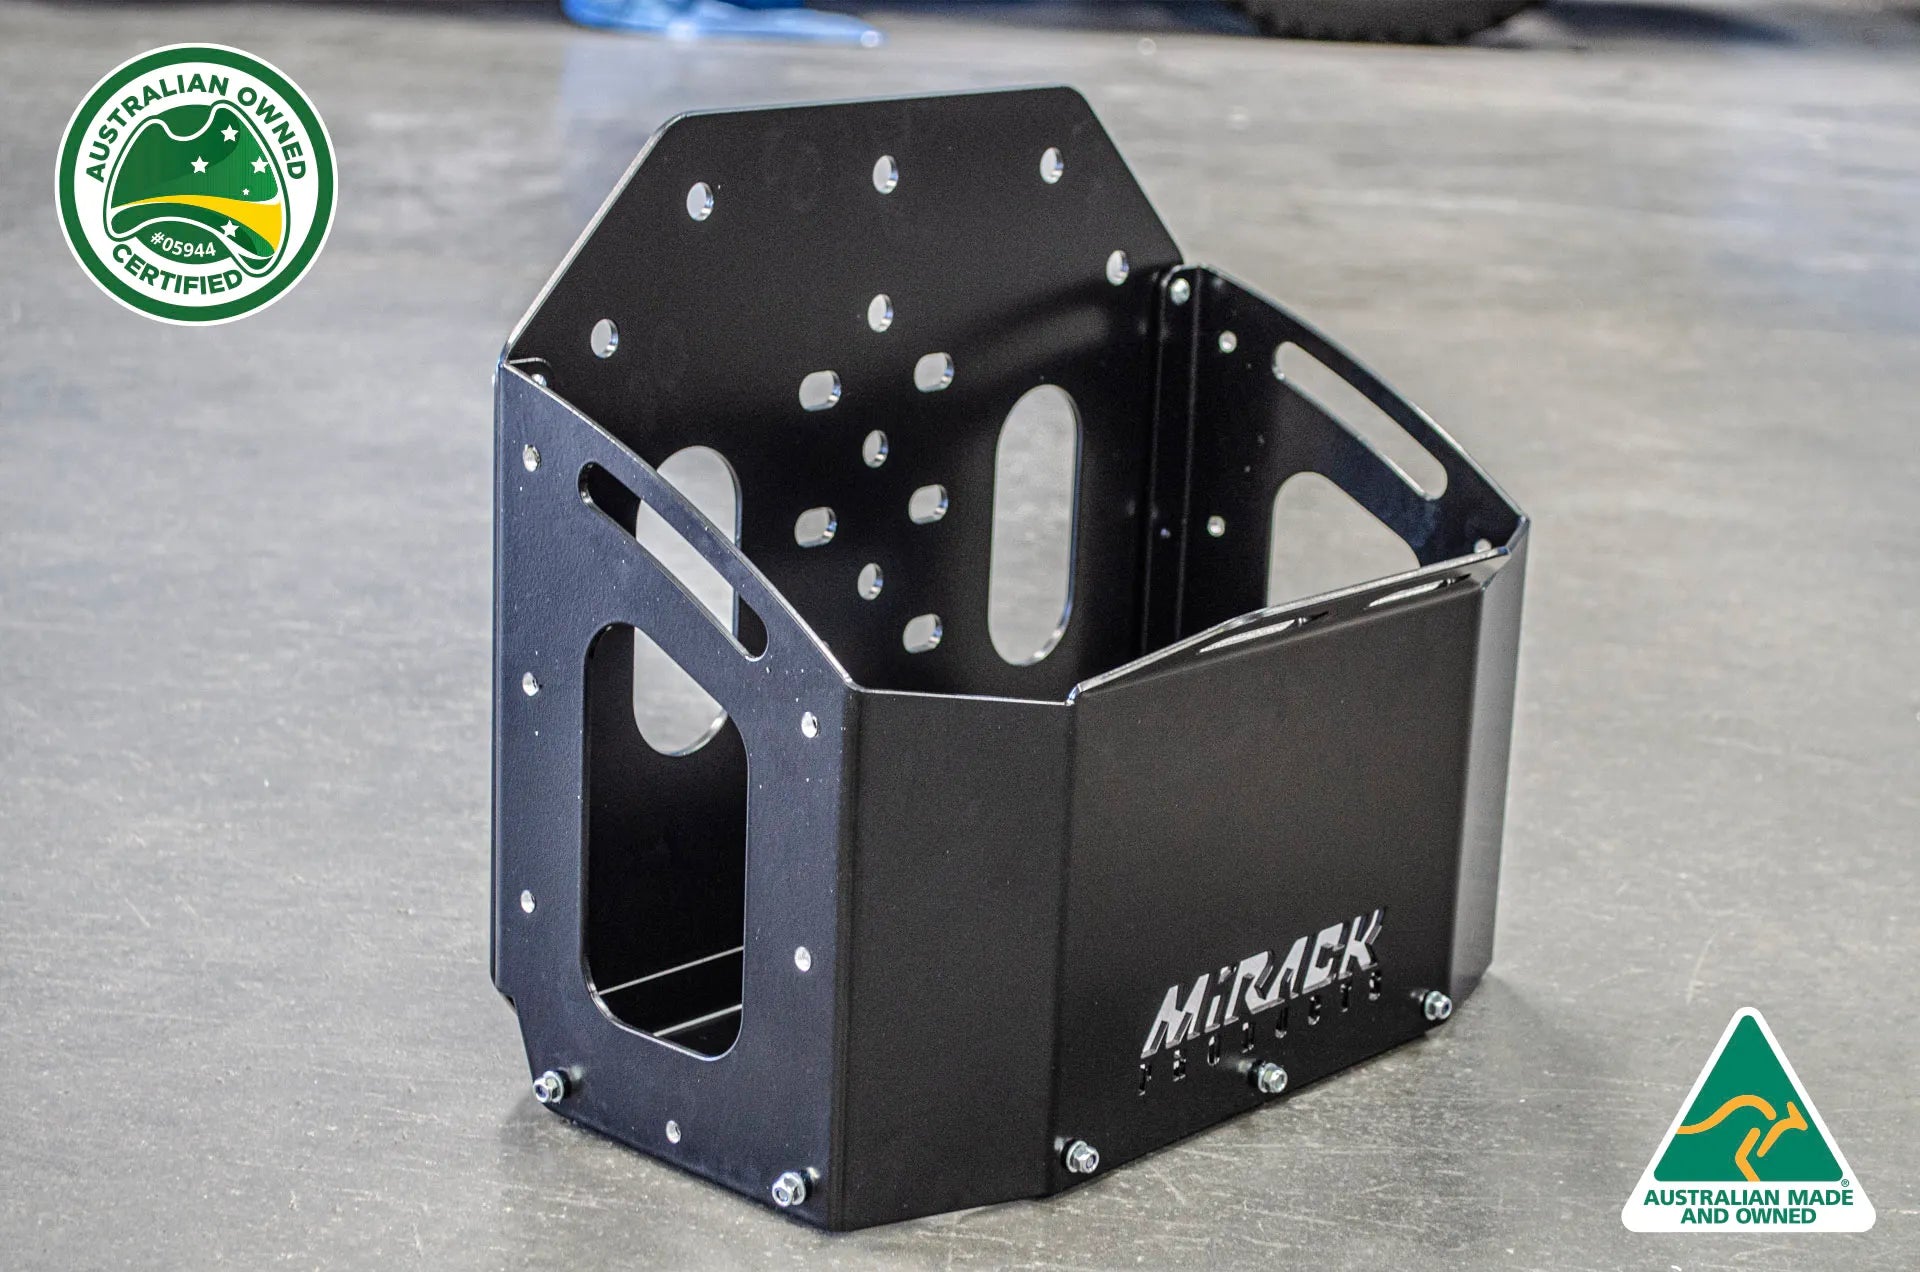 Mirack's laser-cut logo adds a touch of sophistication to its durable steel jerry can holder.